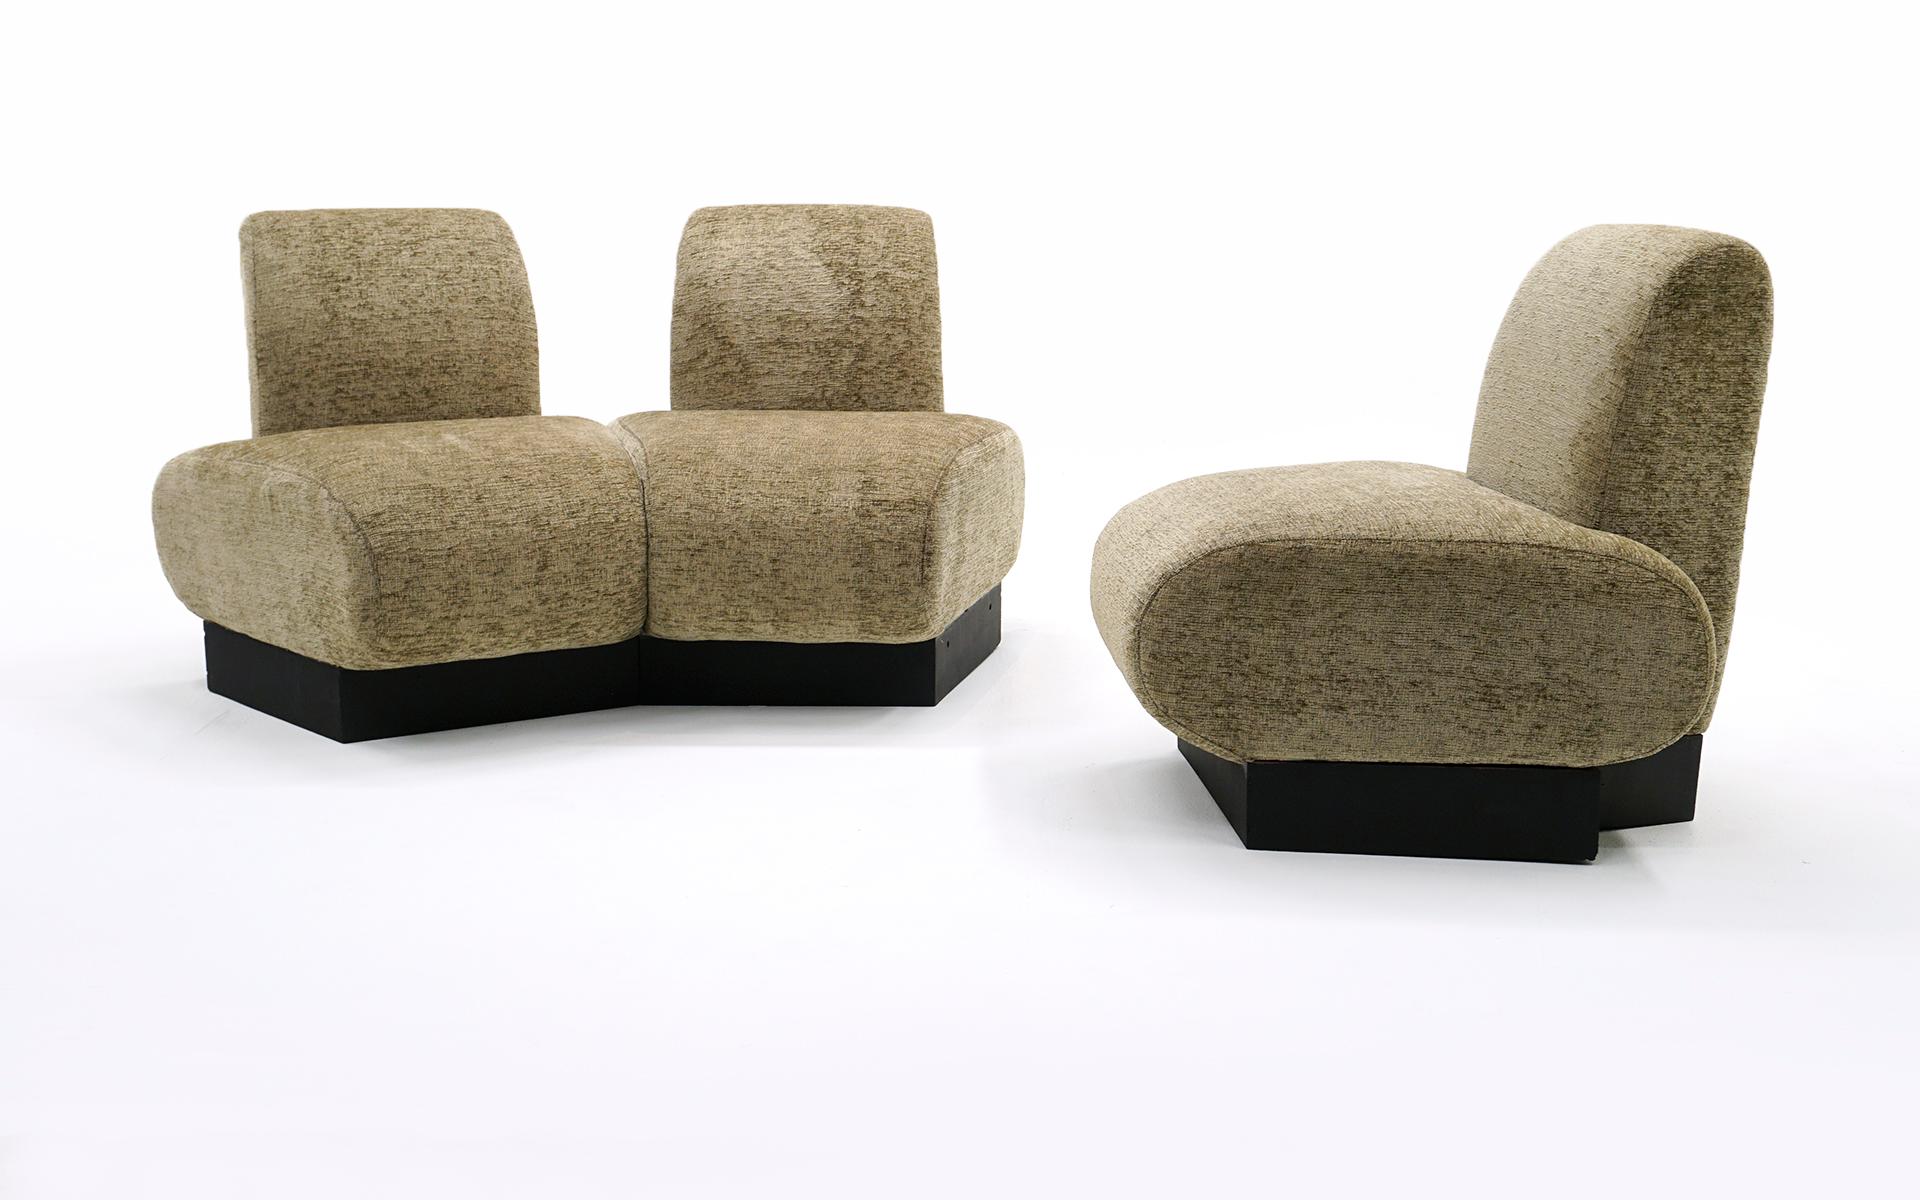 Custom Made Three Seat Curved Sofa.  Separates into Two Pieces.  1